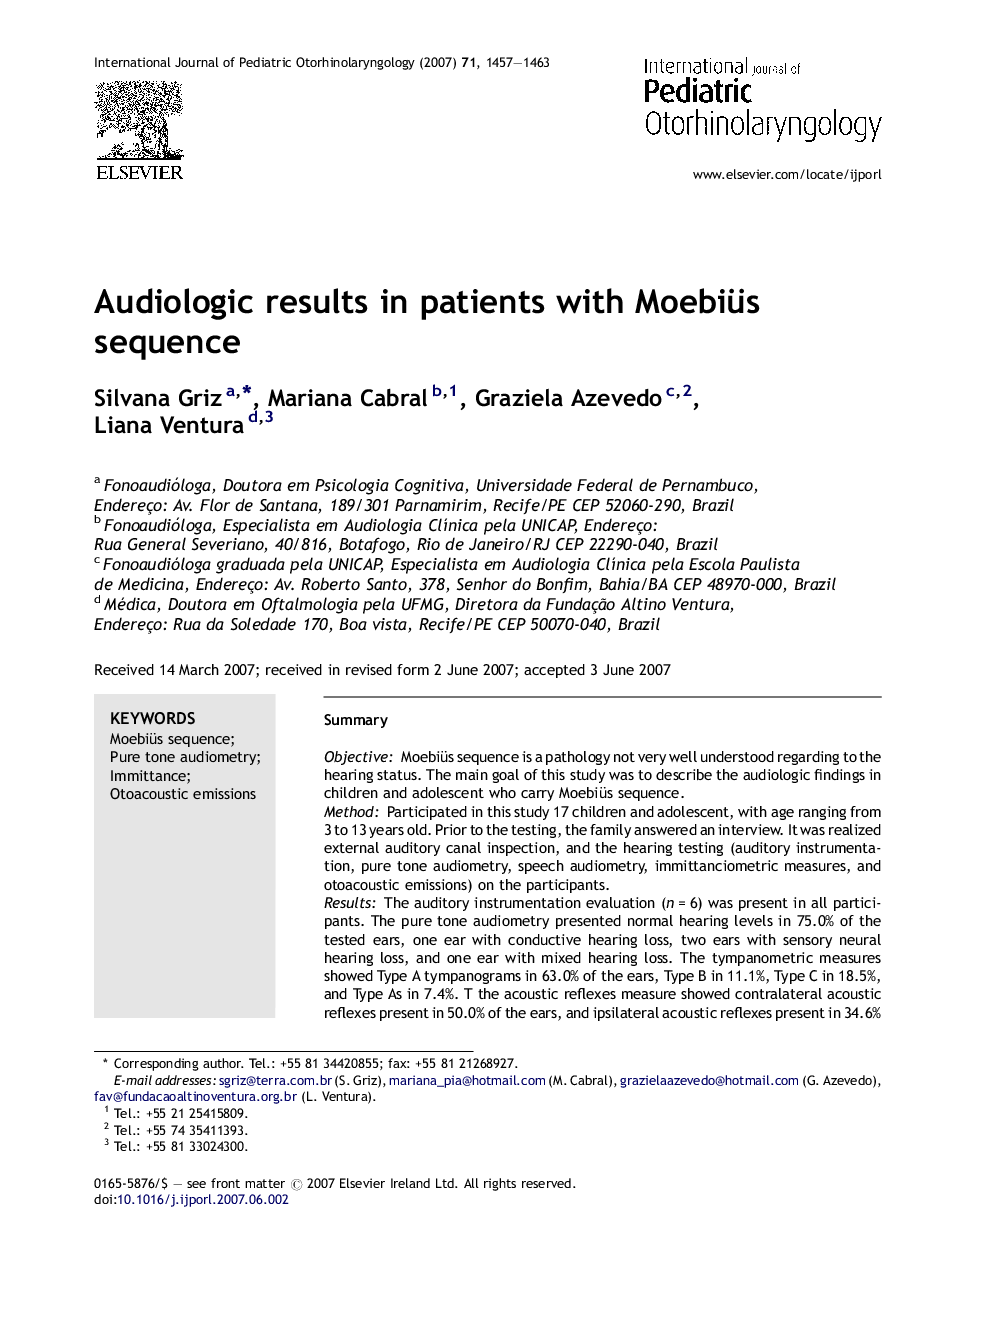 Audiologic results in patients with Moebiüs sequence